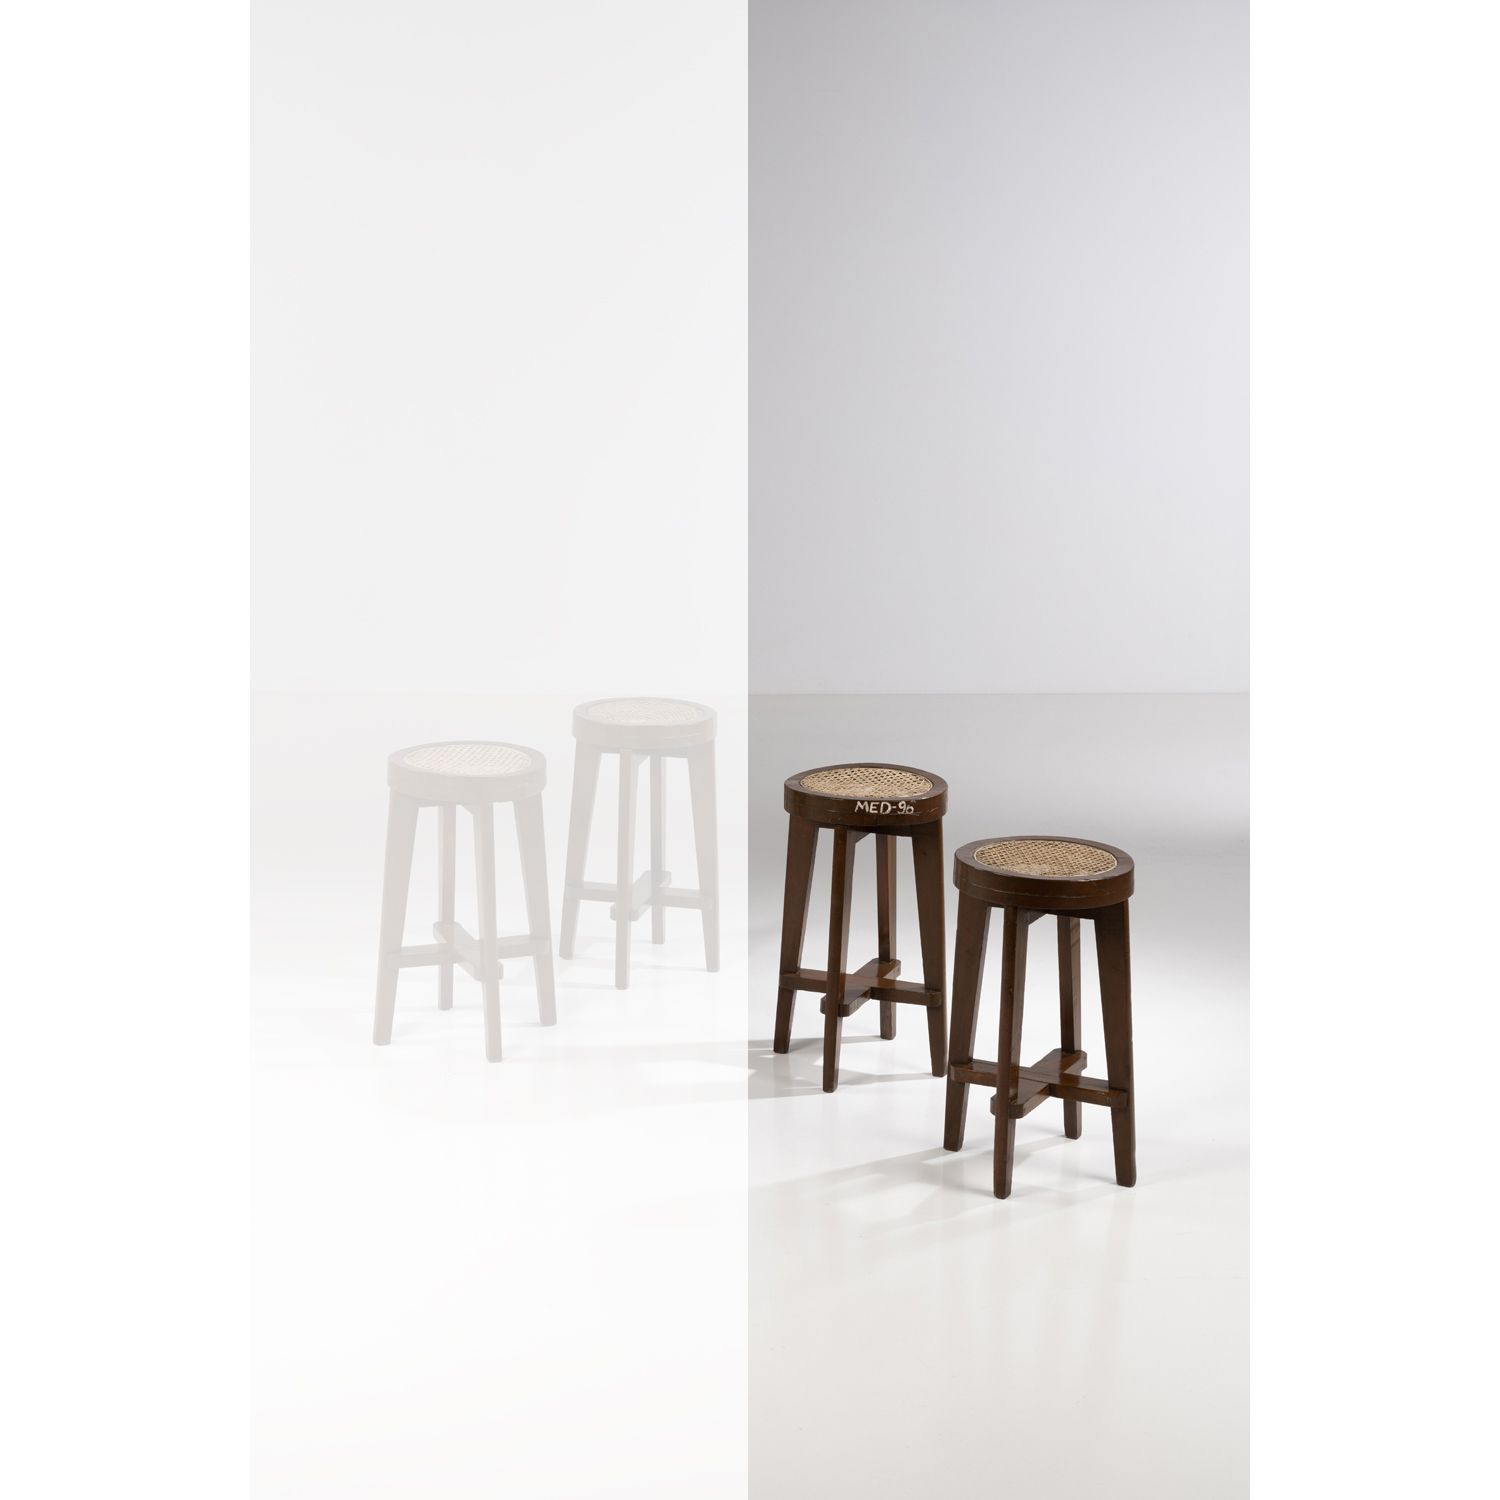 Null Pierre Jeanneret (1896-1967)

Pair of stools

Teak and caning

Model create&hellip;